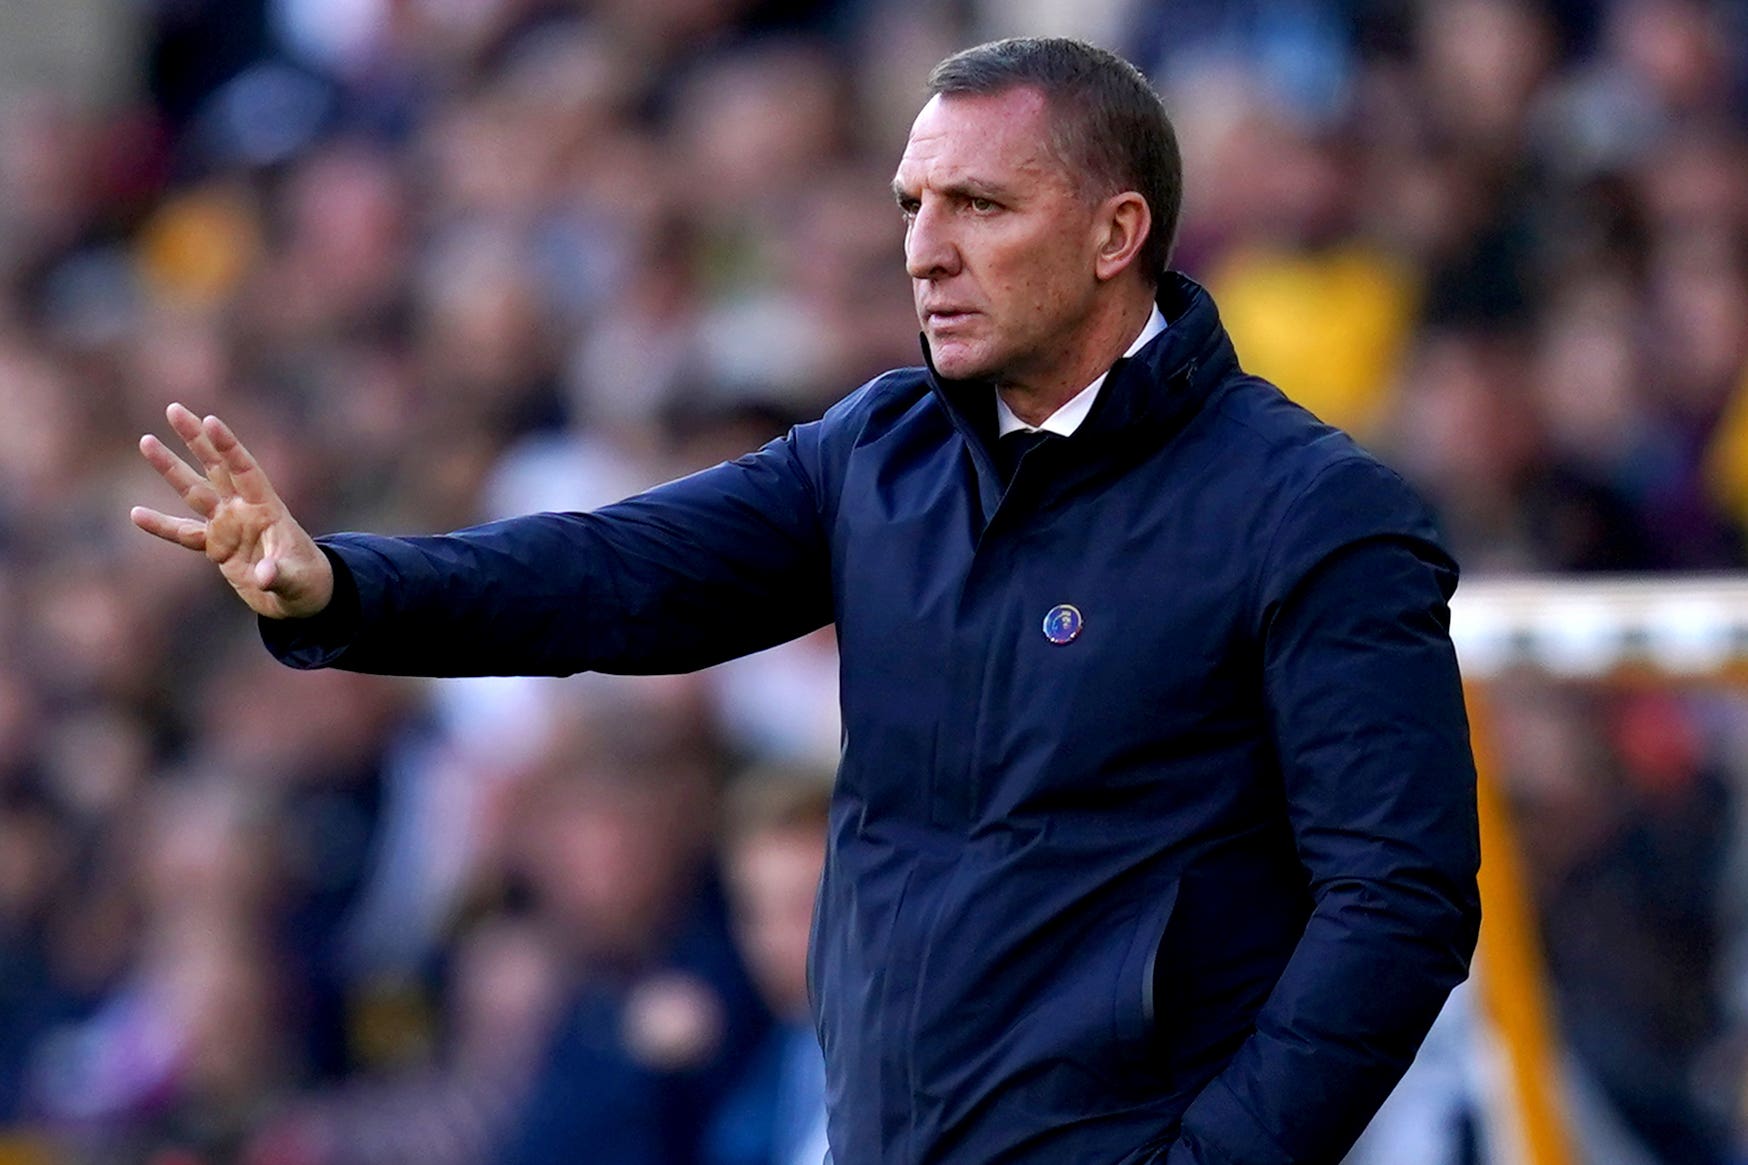 Leicester boss Brendan Rodgers is wary of suffering an upset (Nick Potts/PA)